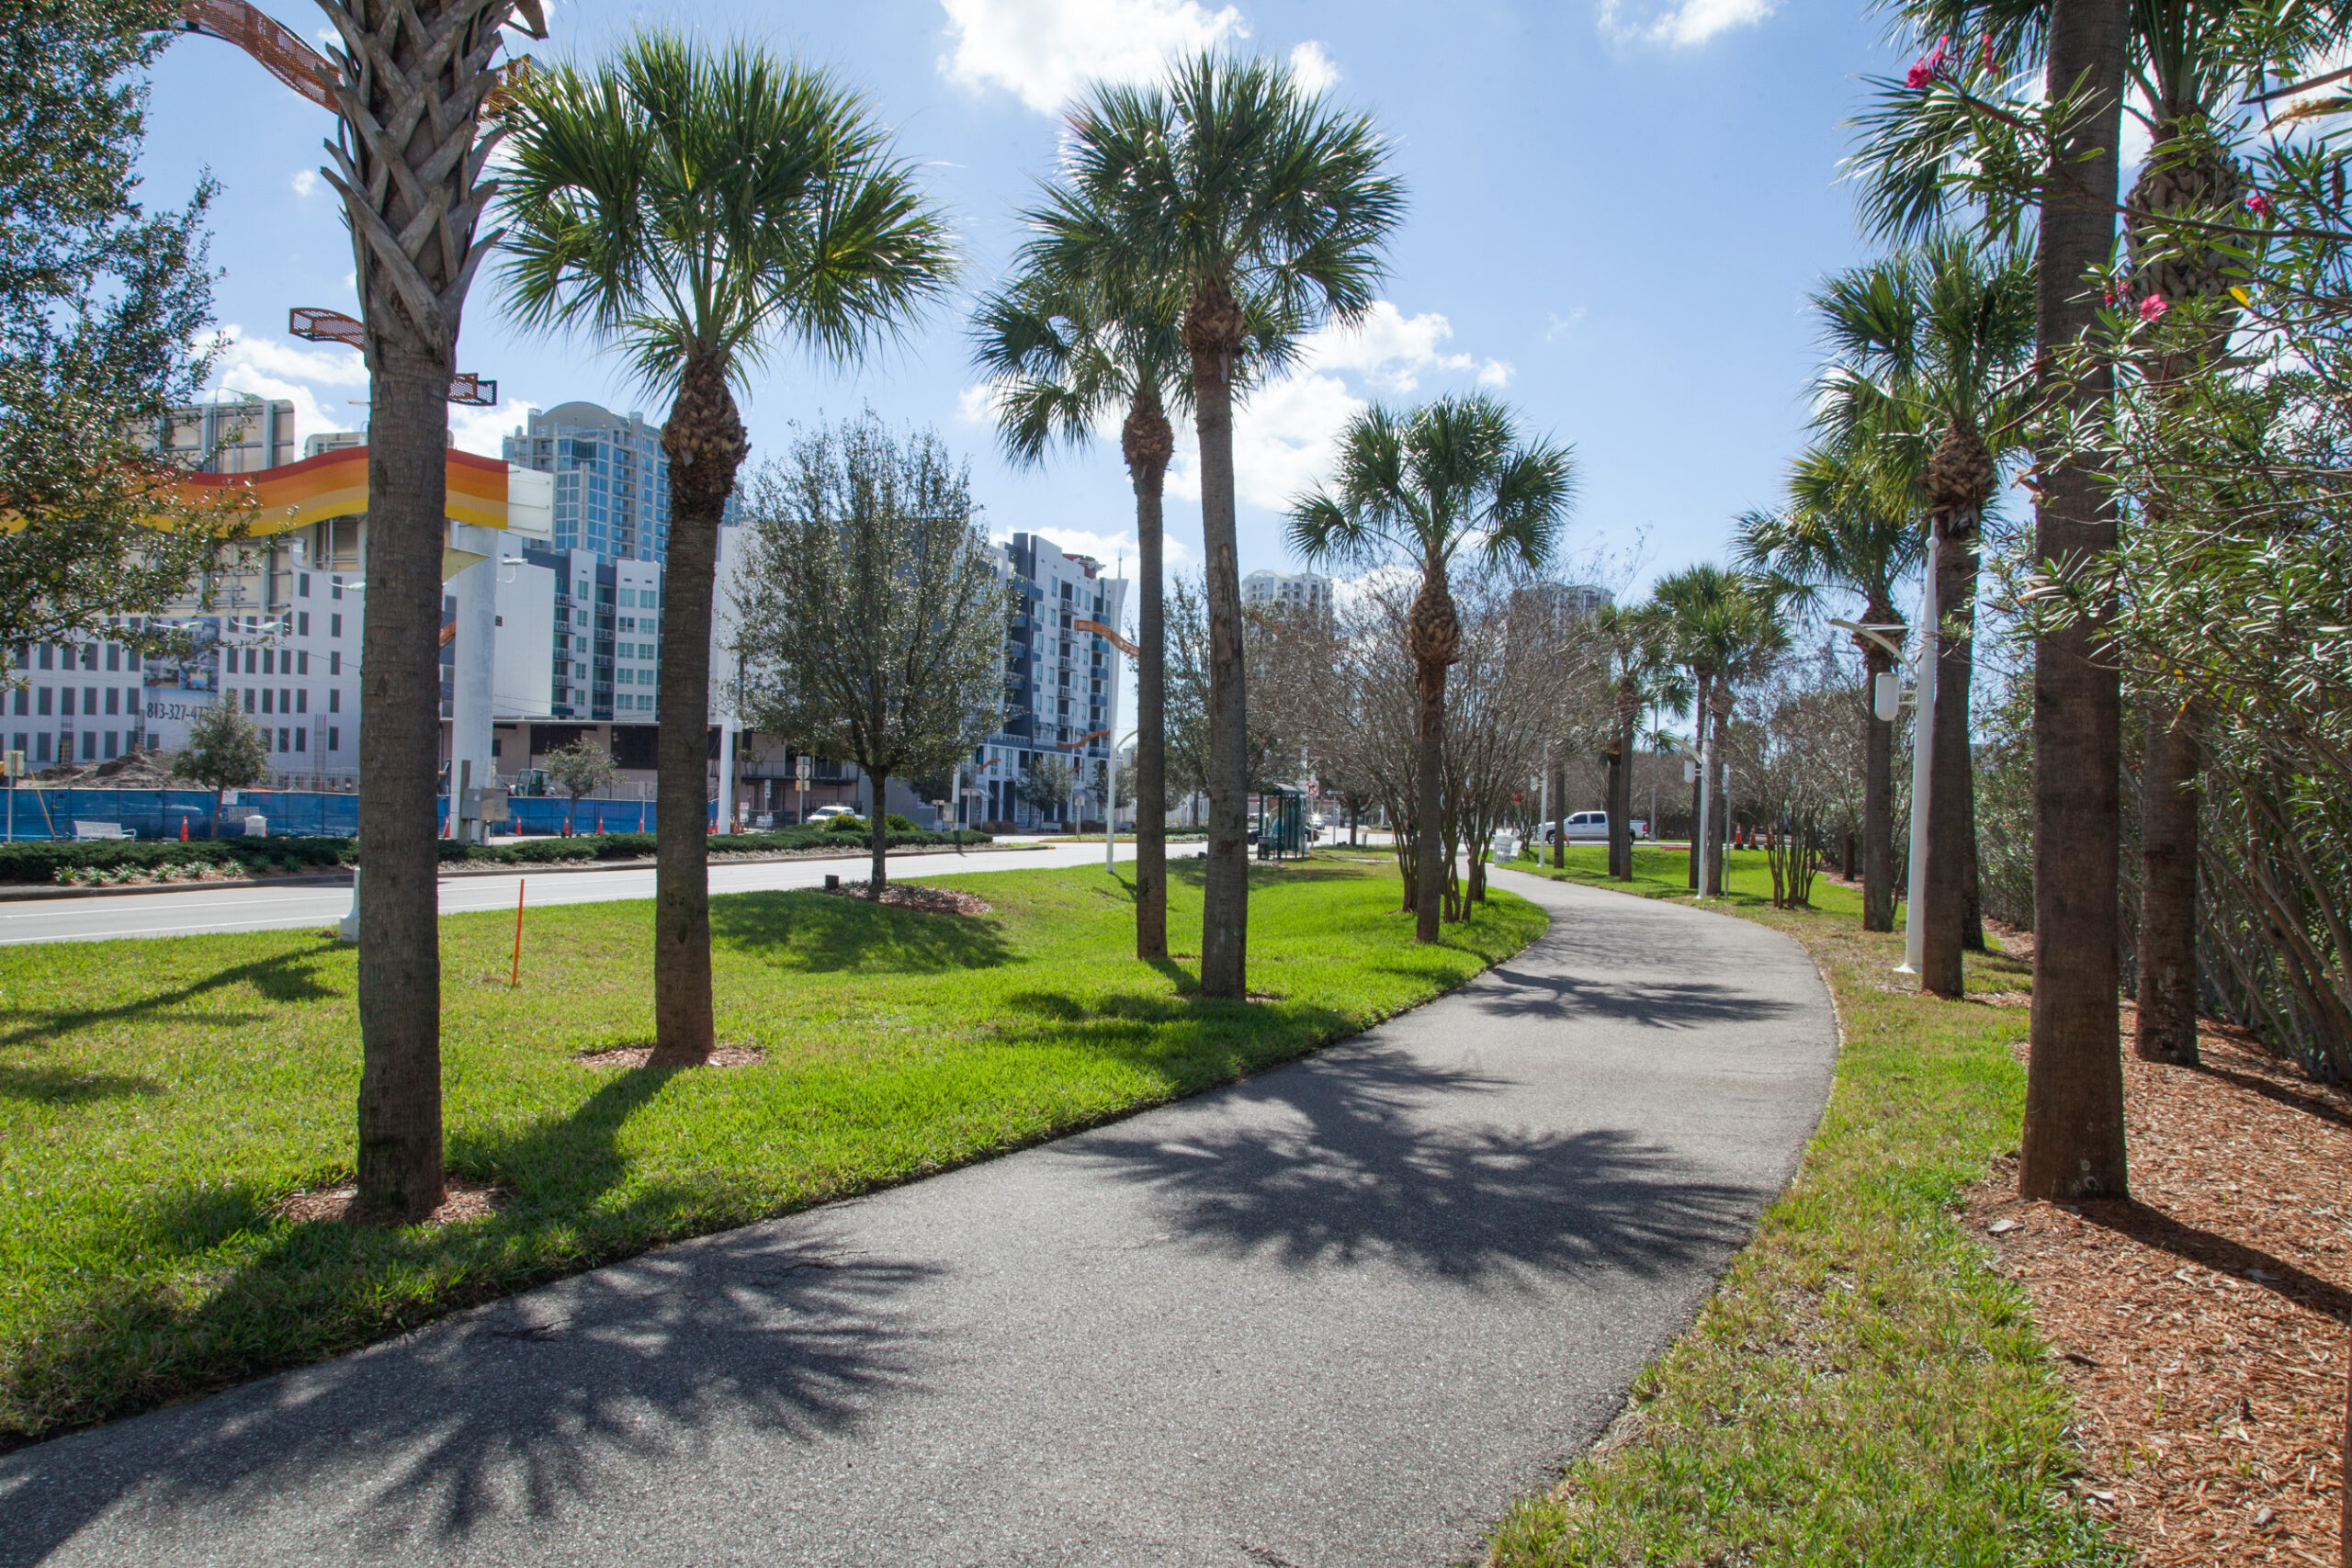 Downtown Tampa Holiday Adventures Await: Get there on the Selmon Greenway